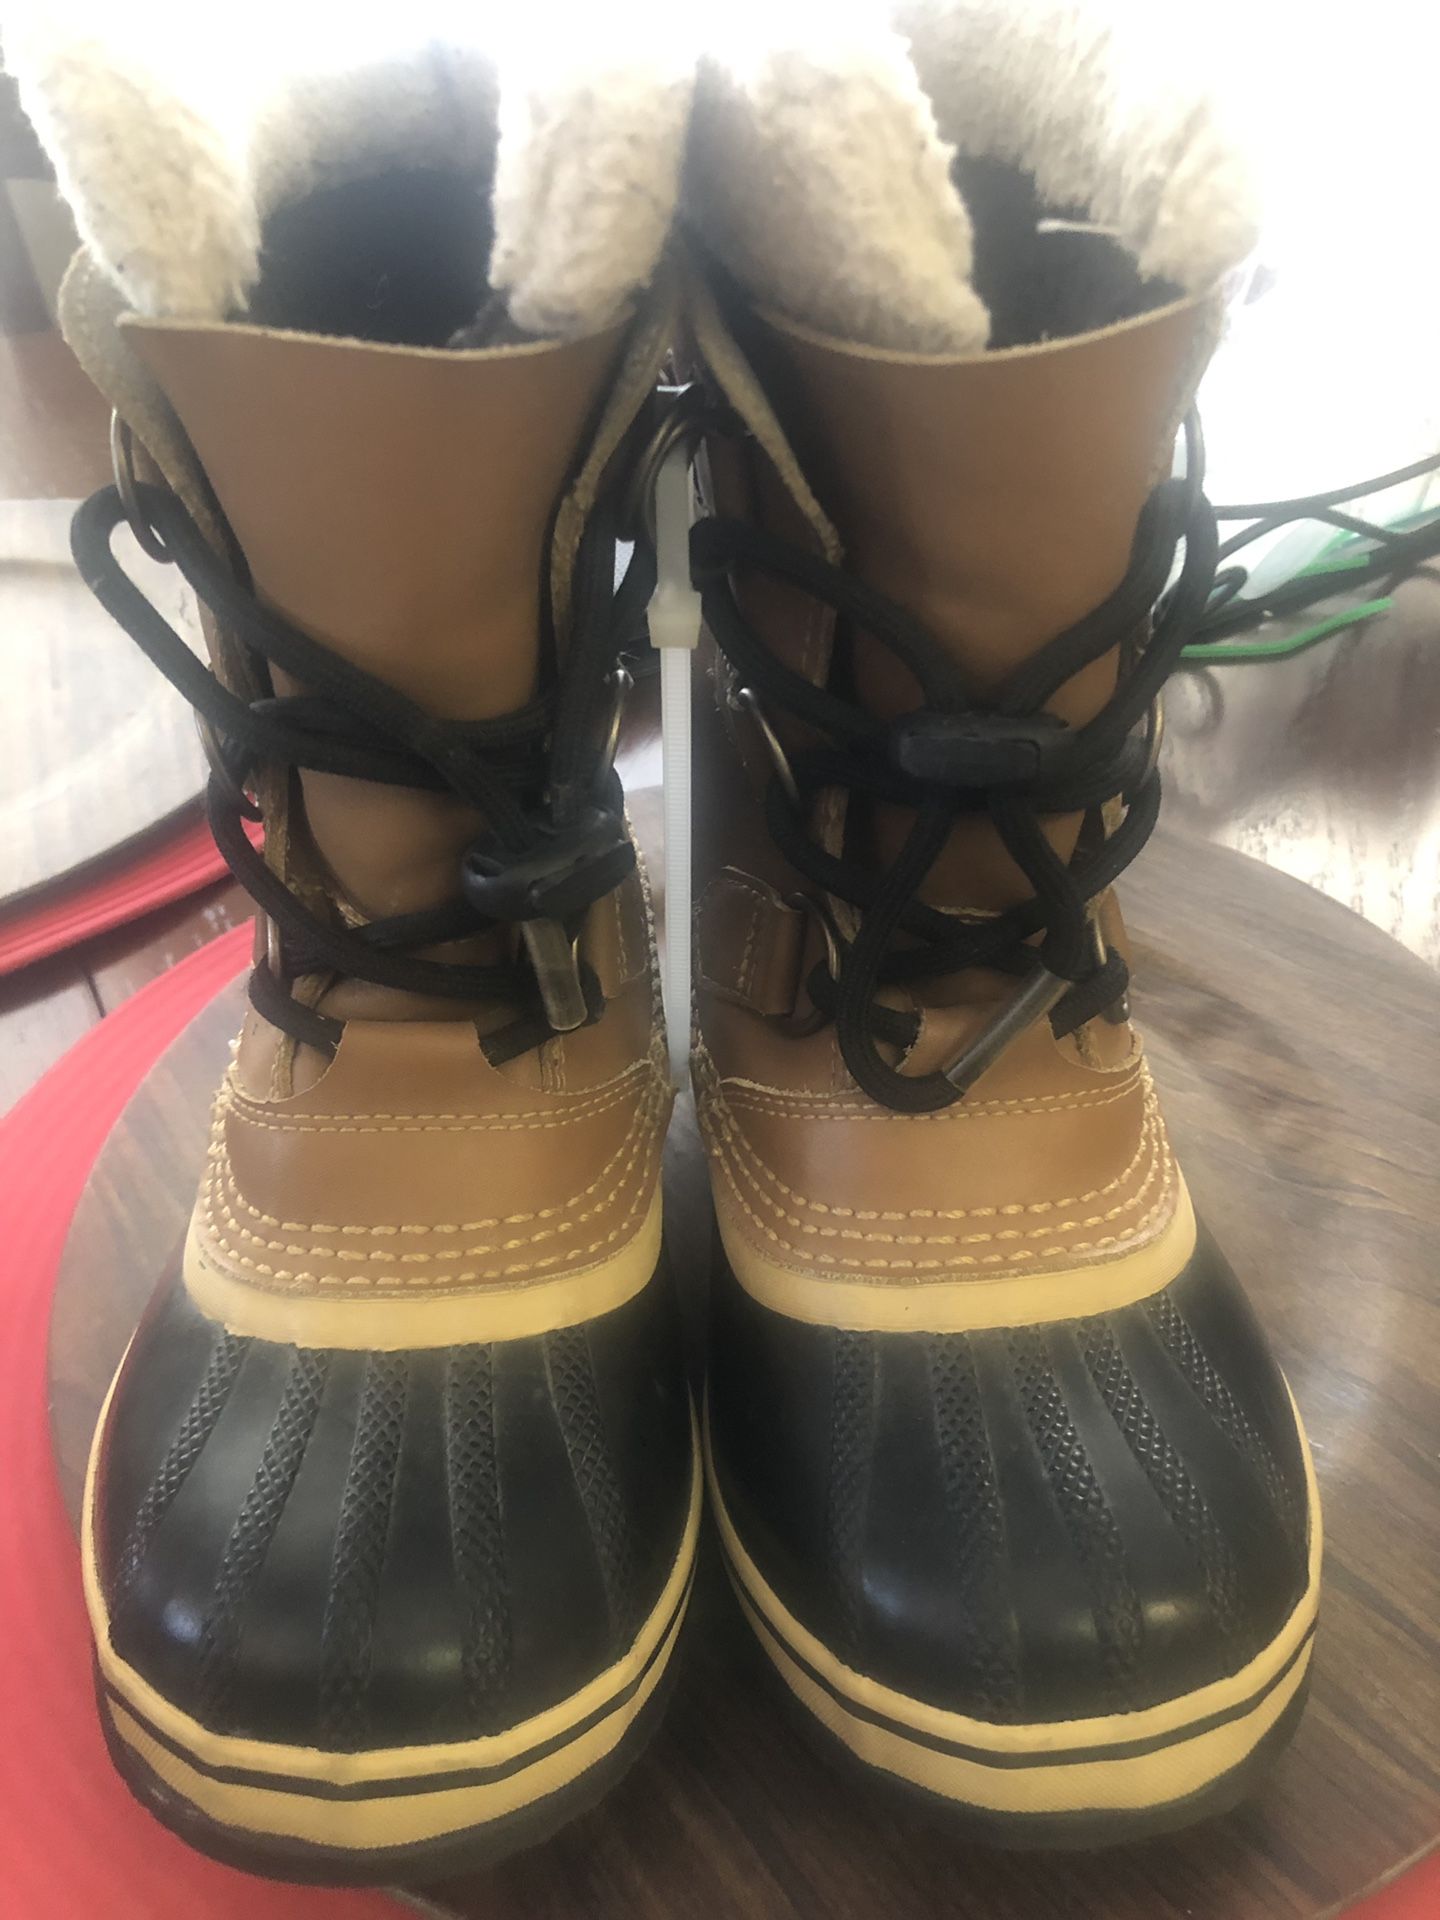 Sorel Leather snow boots kids size 1